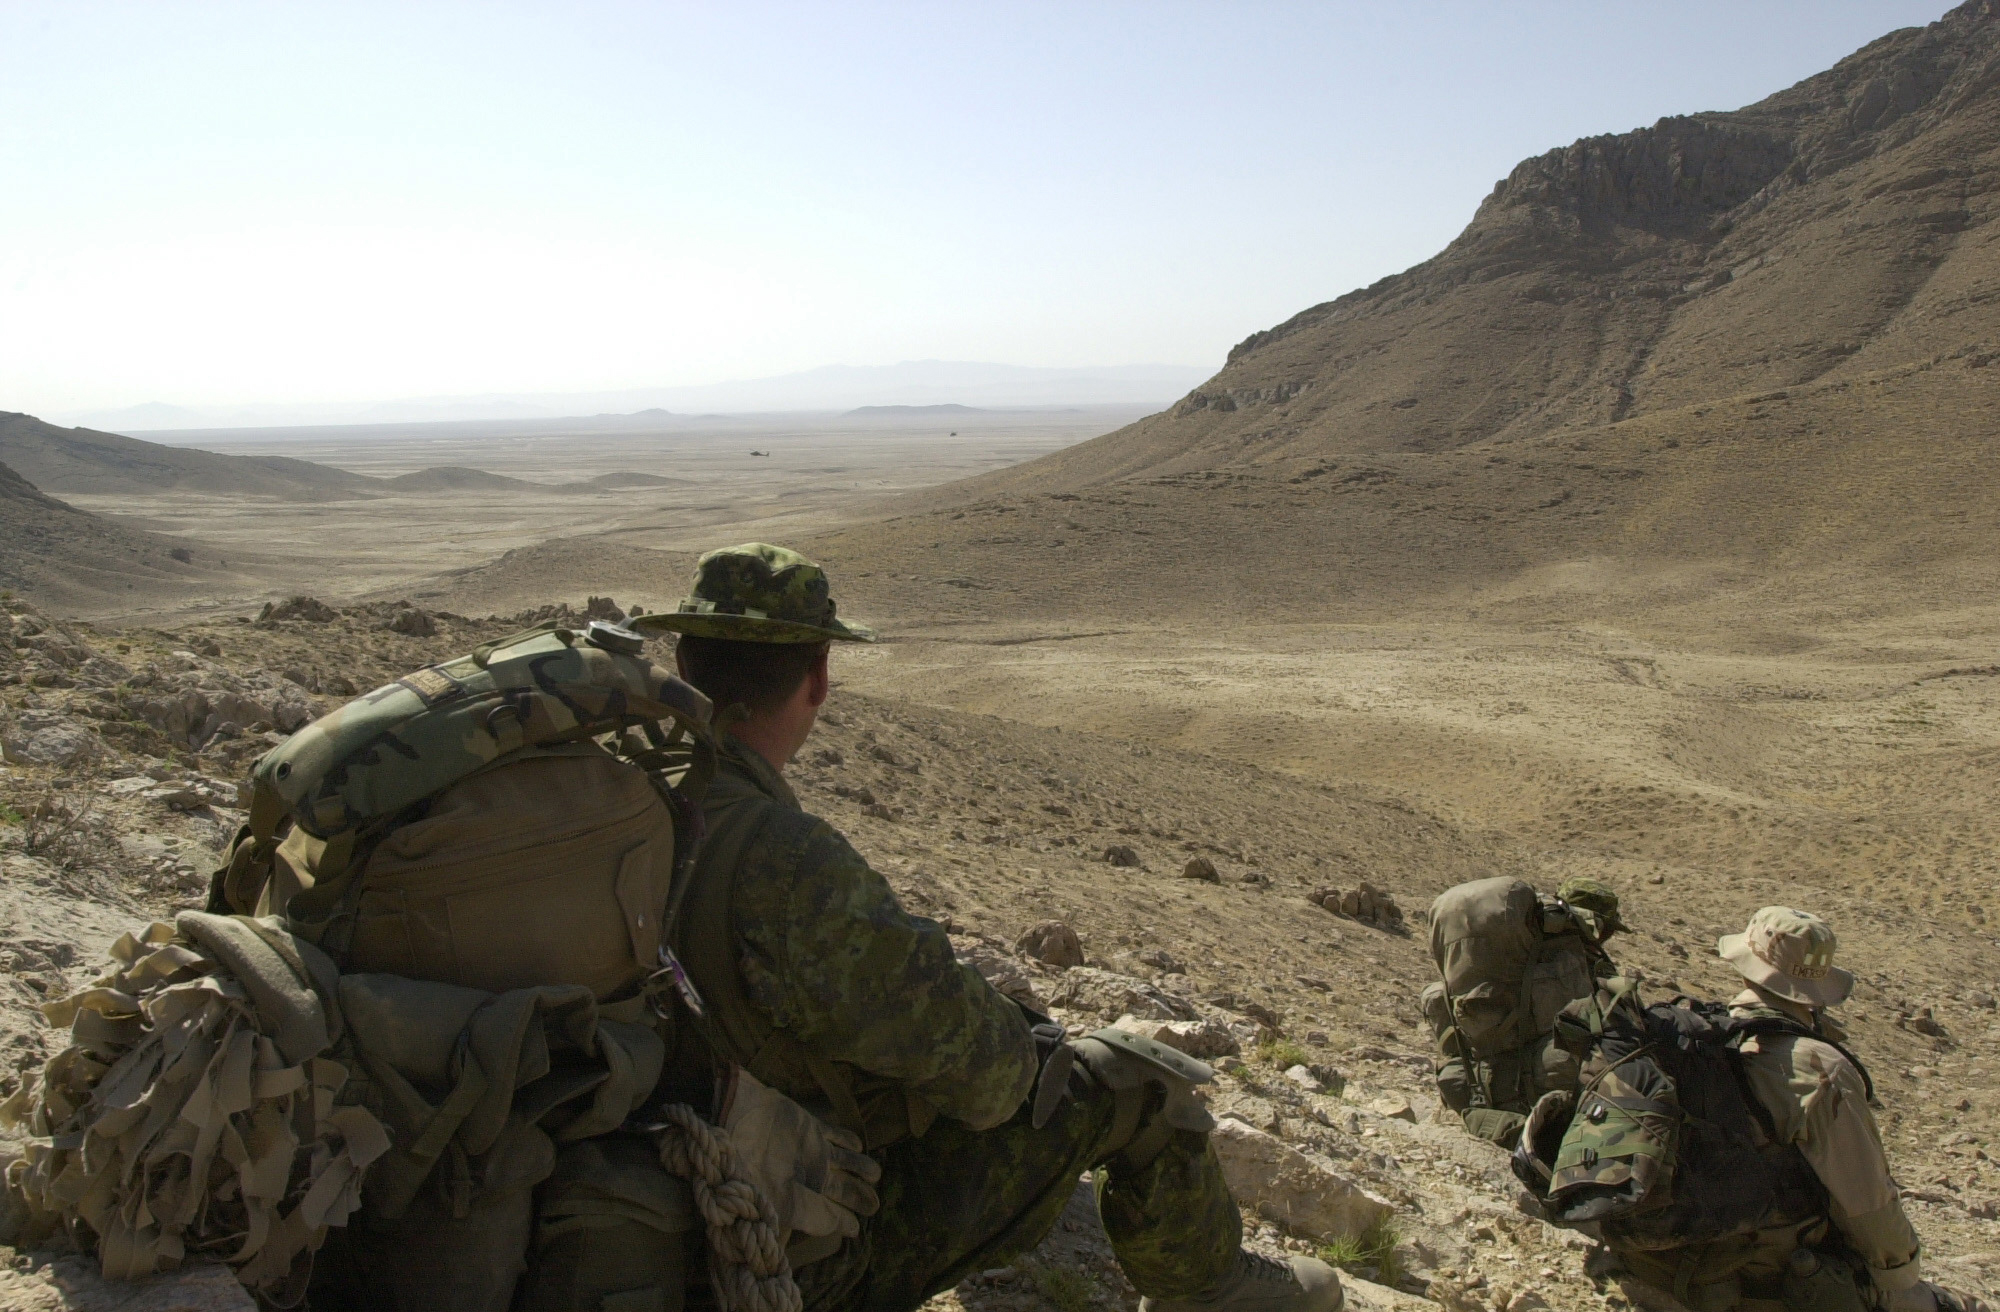 File:Canadian soldiers in Afghanistan.jpg - Wikipedia, the free ...